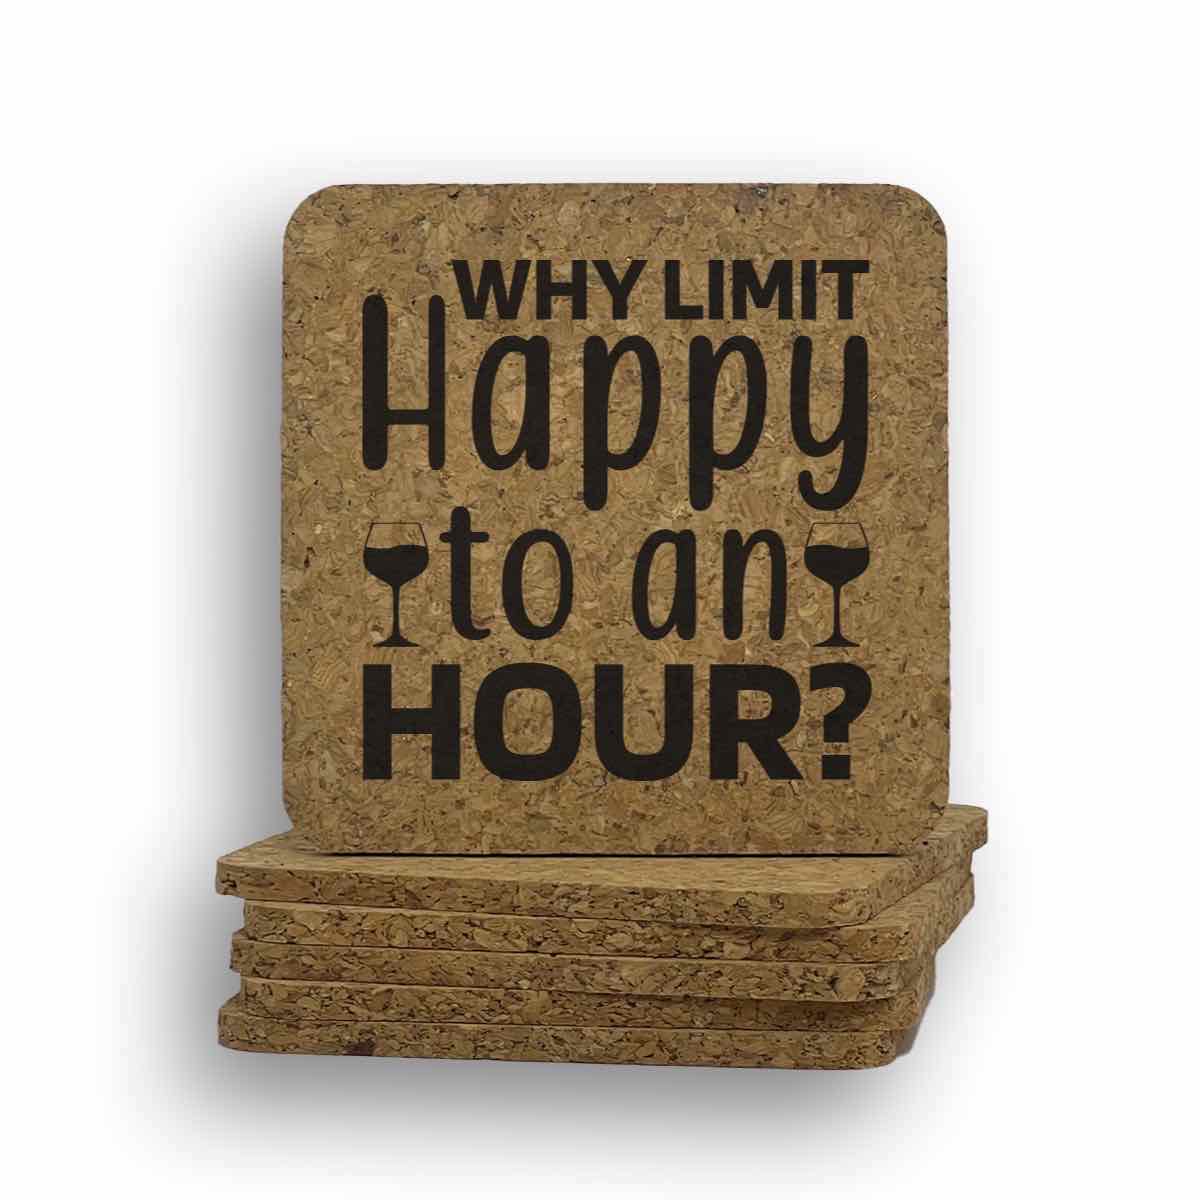 Why Limit Happy To An Hour Coaster